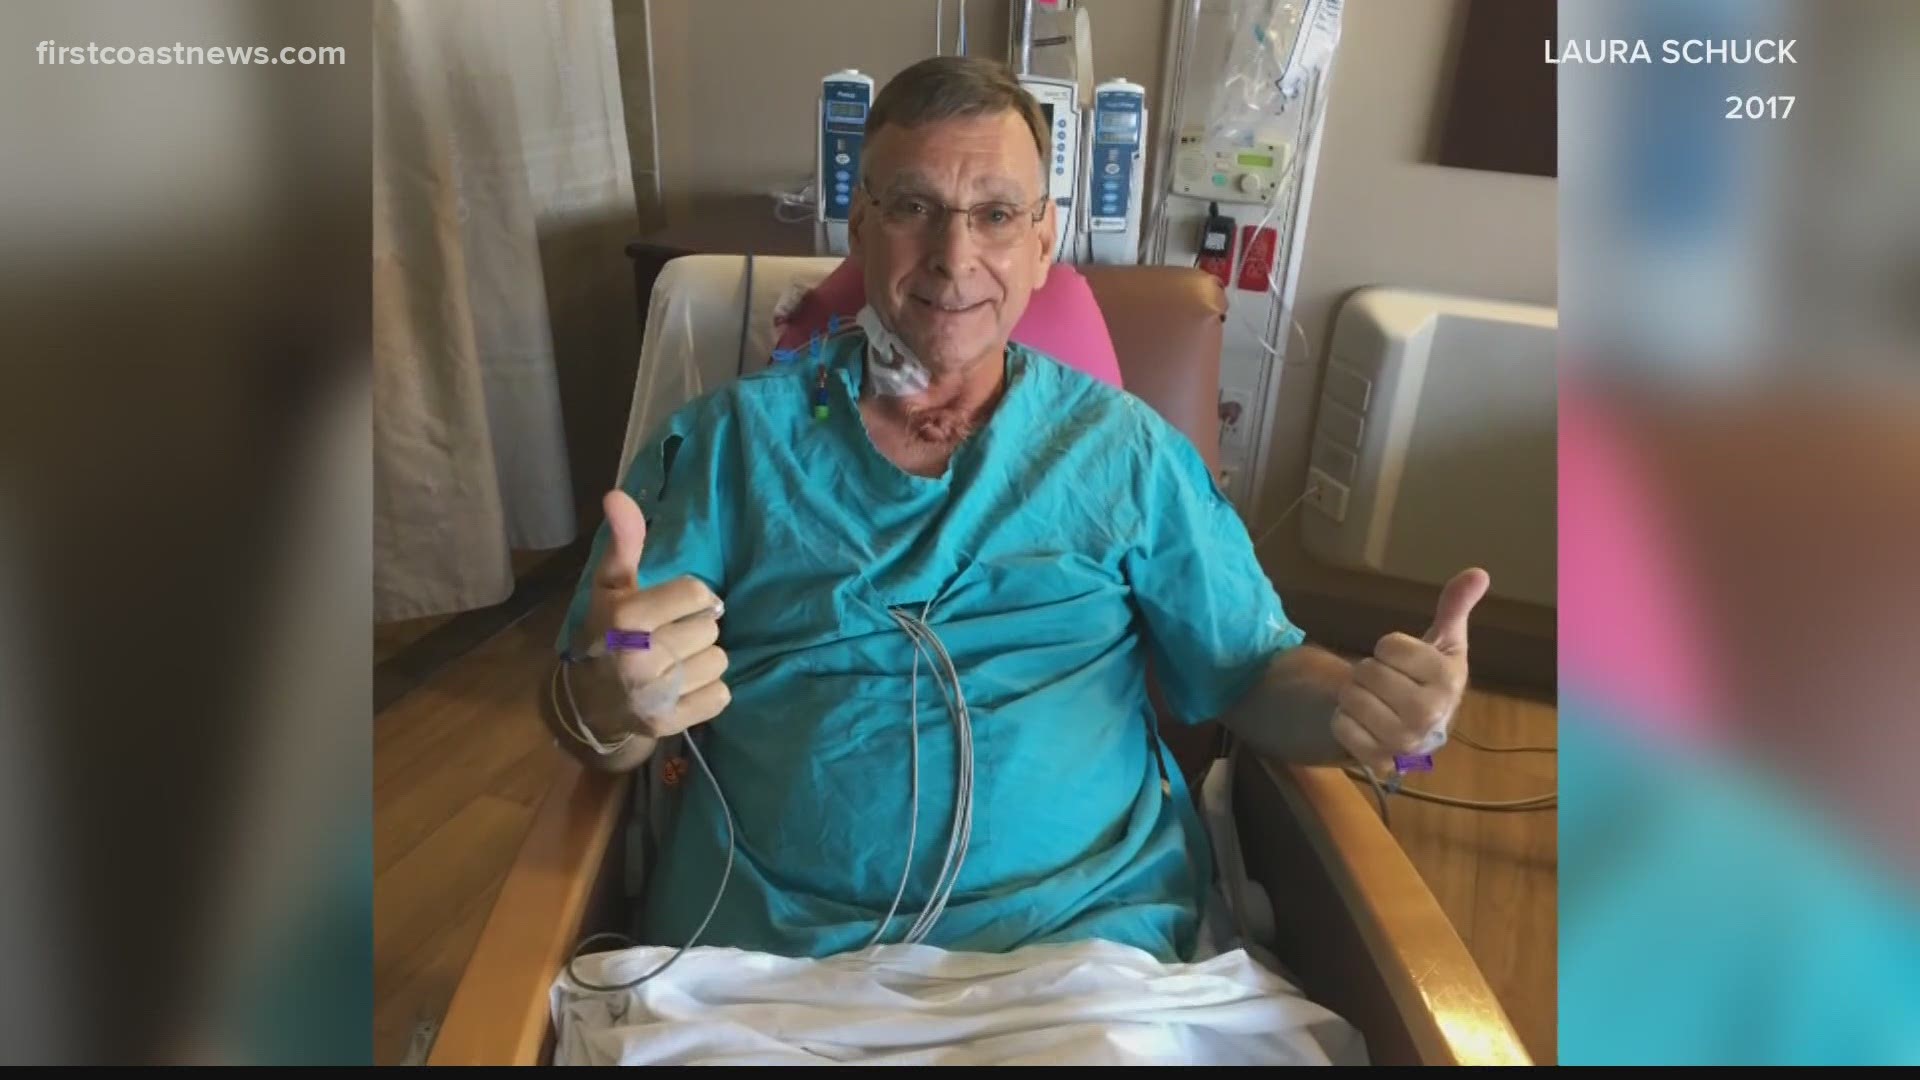 Seventy-three-year-old Air Force veteran Carl Schuck was in the hospital for nearly a month as he battled COVID-19.